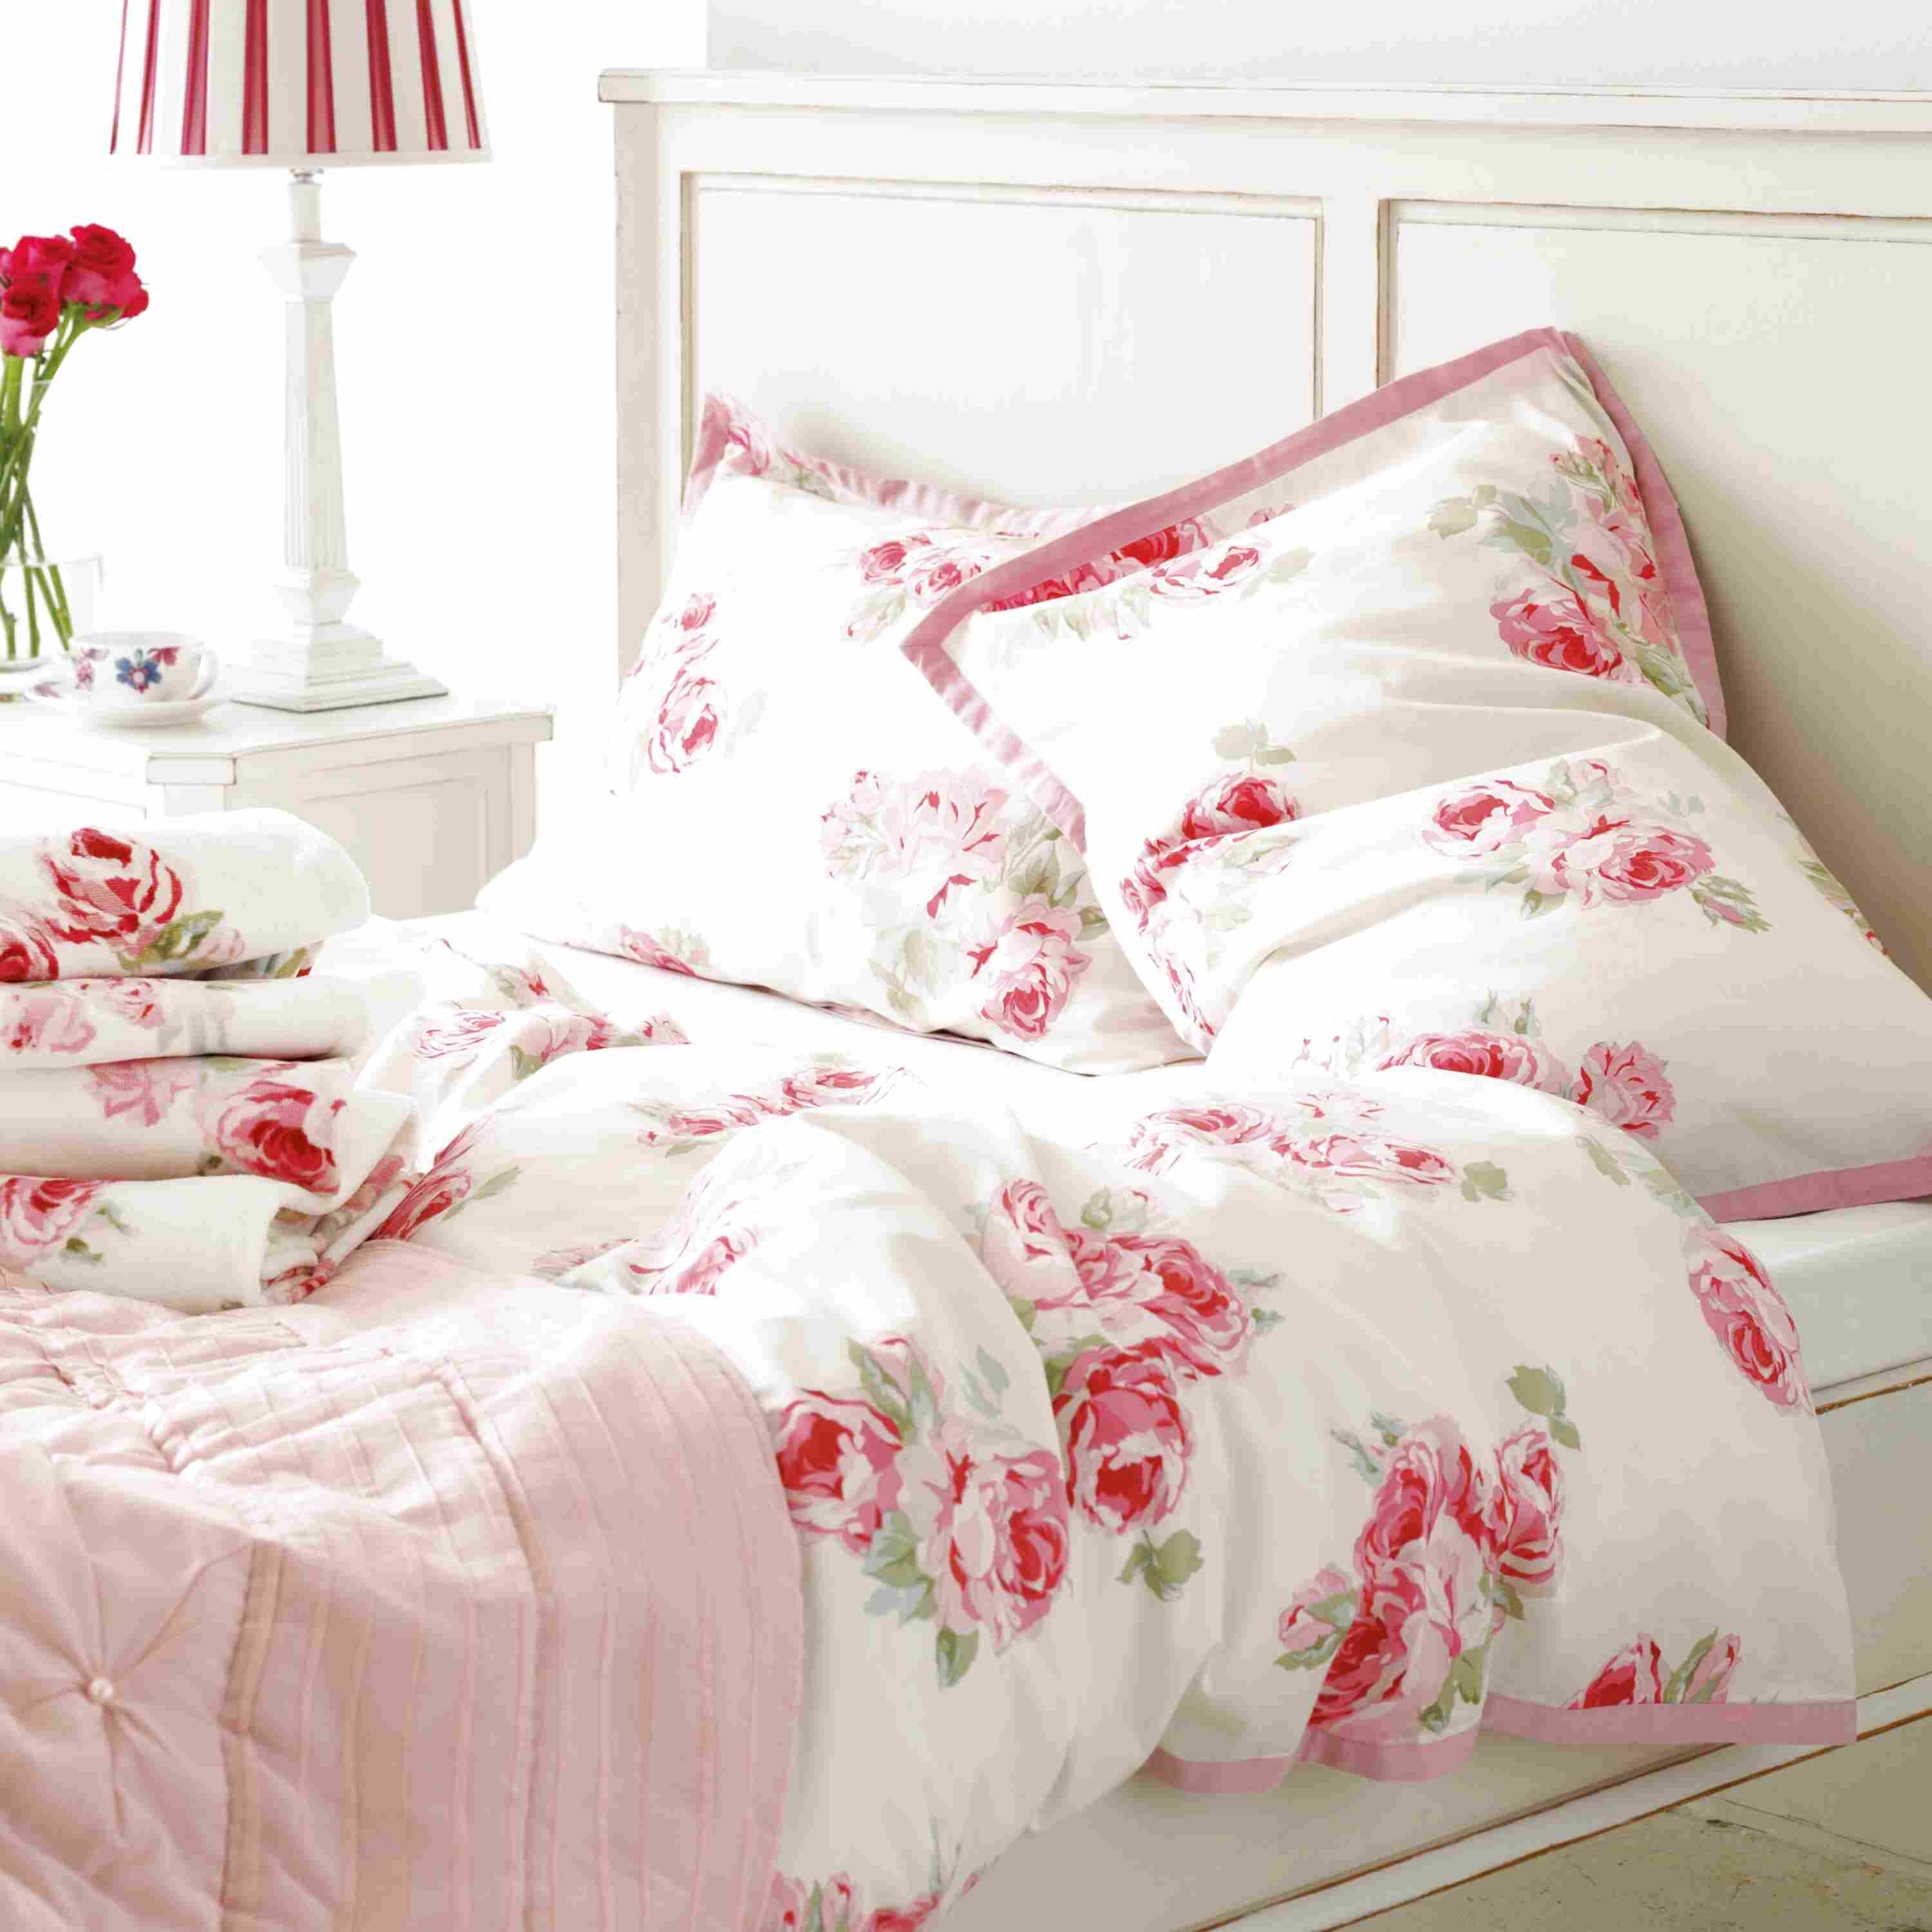 Laura Ashley Rose Bedding For Sale In Uk View 74 Ads